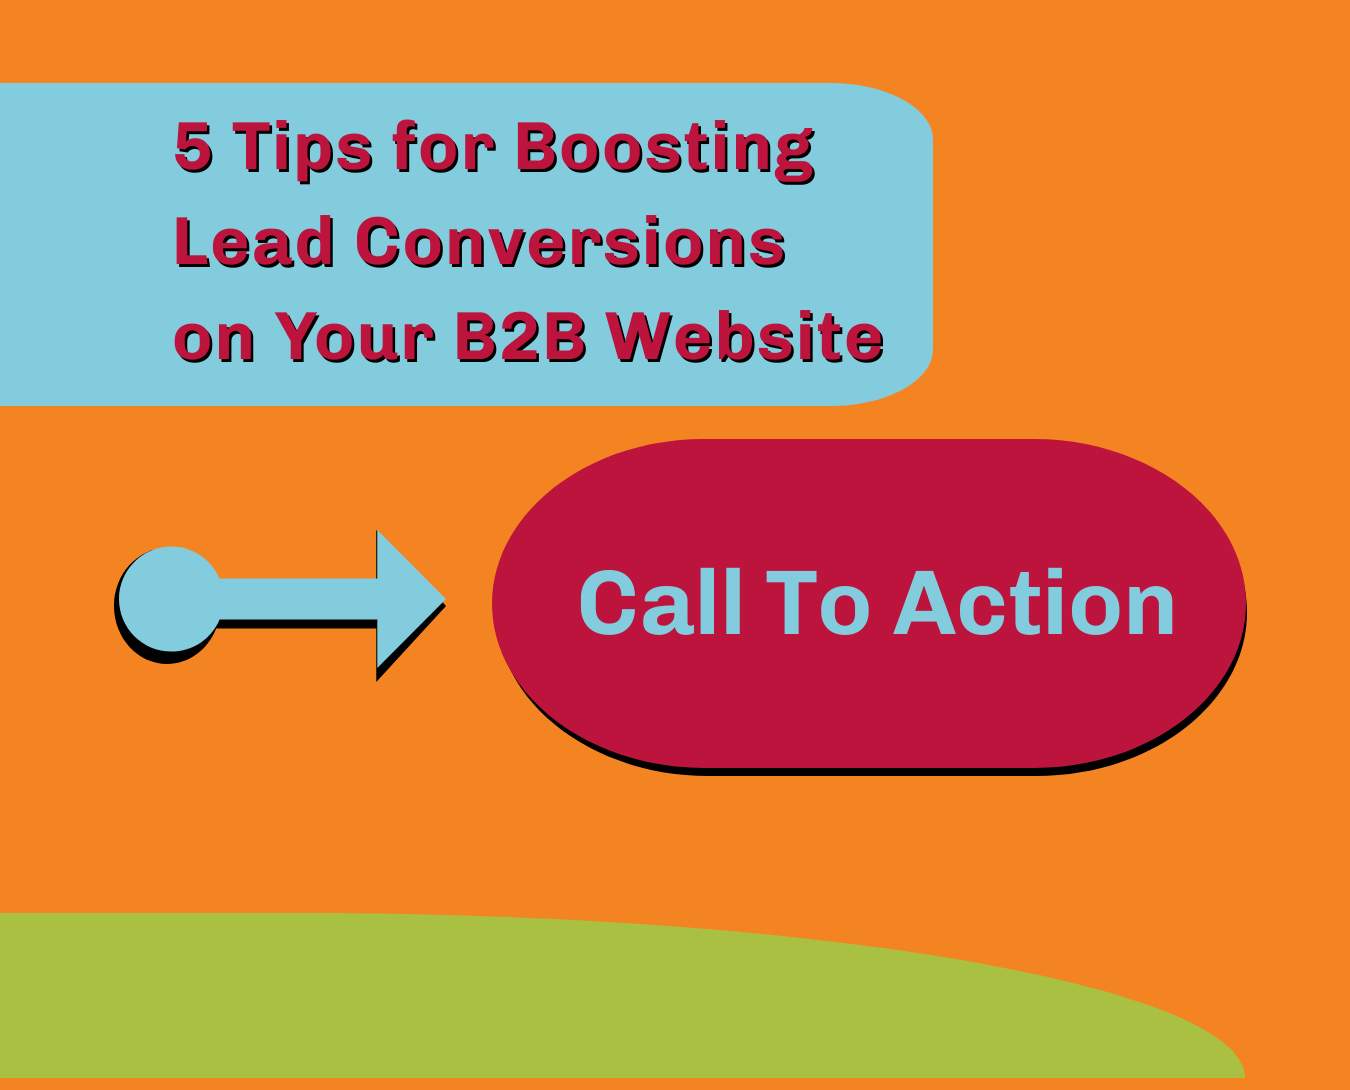 5 tips for boosting lead conversions on your B2B website